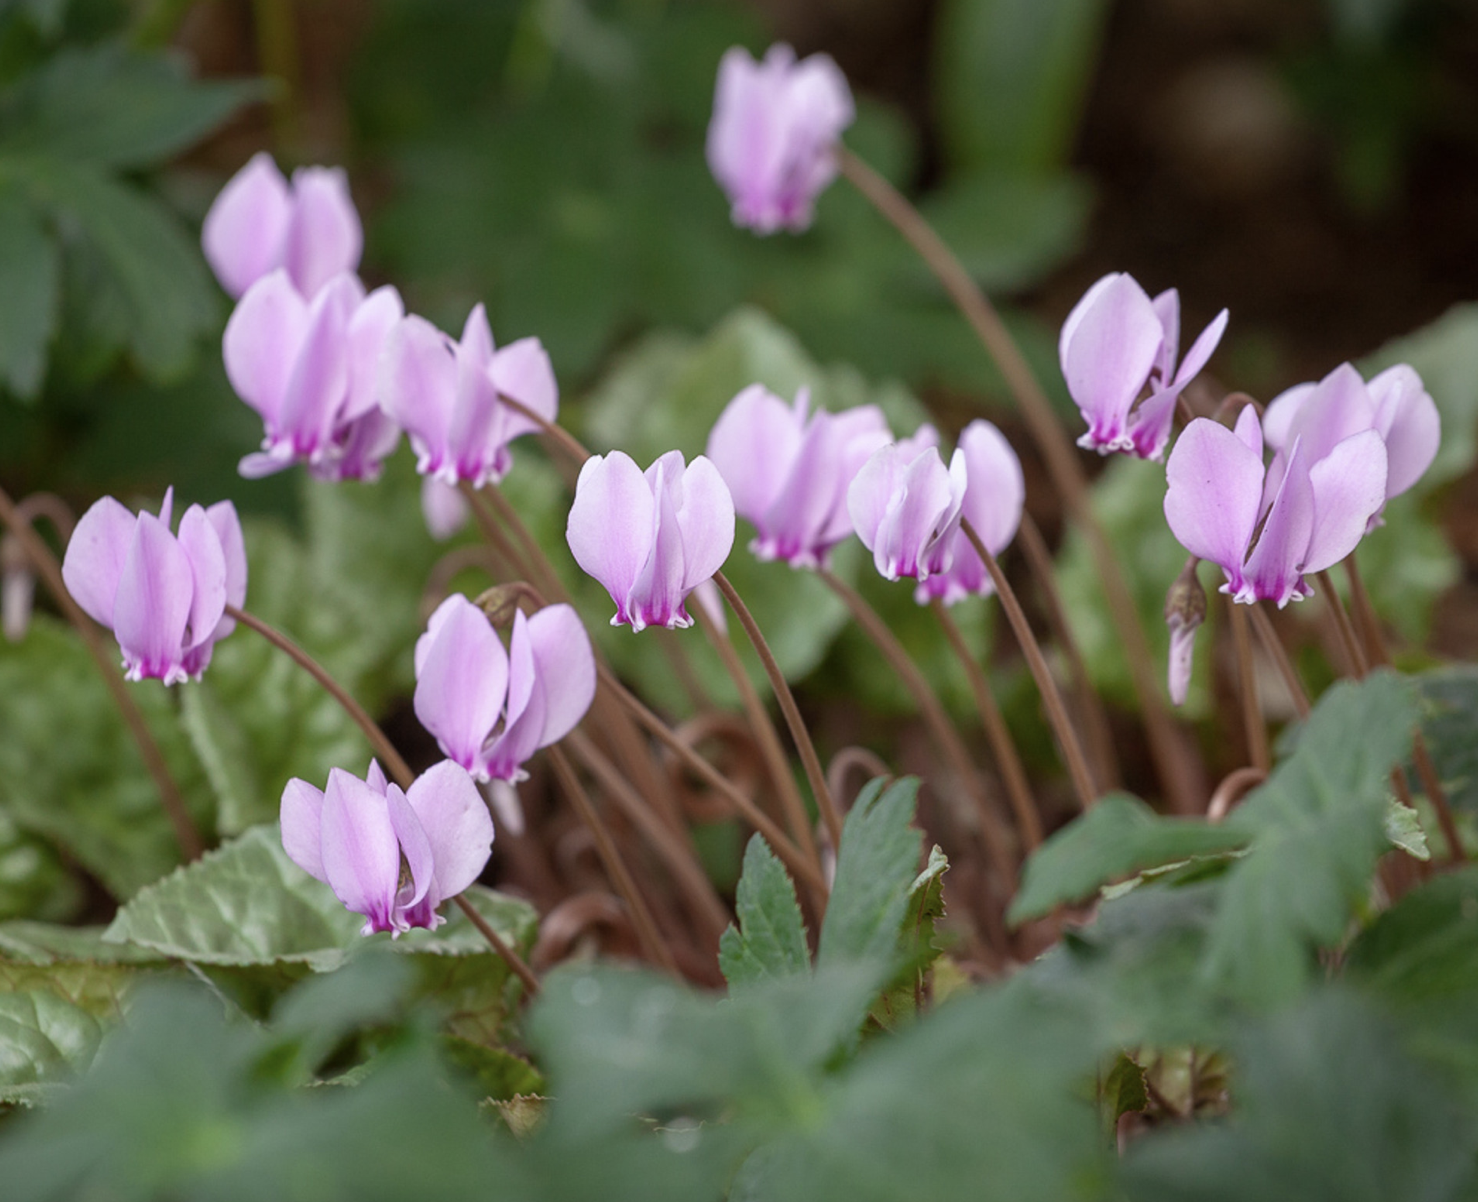 Cyclamens are hardy for winter flowering